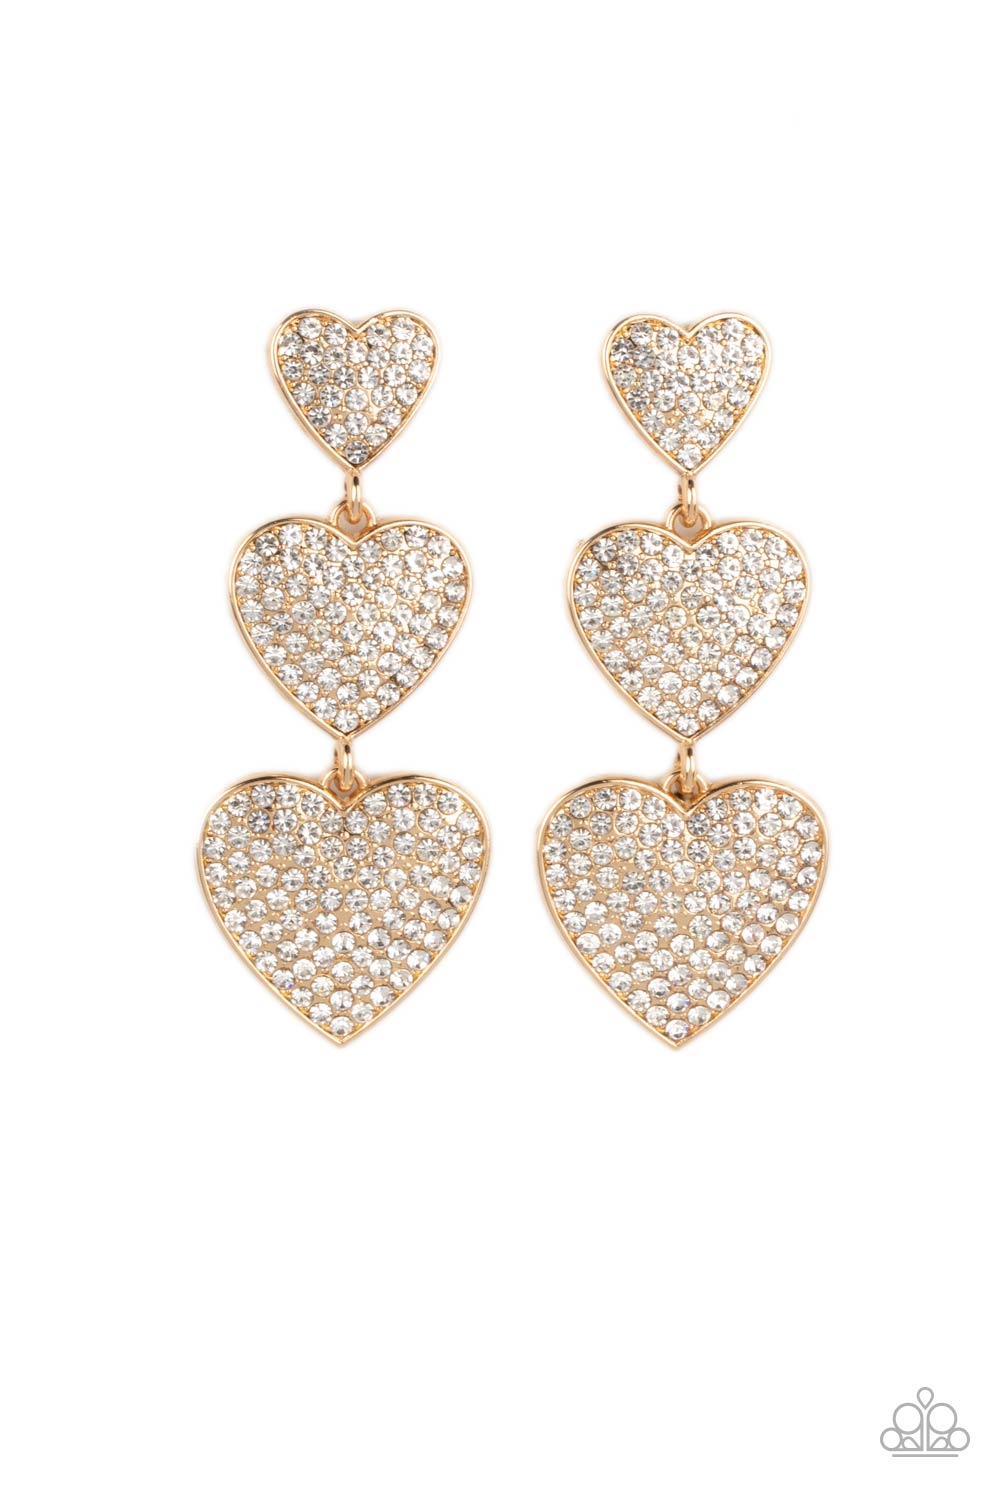 Paparazzi Accessories Couples Retreat - Gold Three white rhinestone-studded gold hearts gradually increase in size as they cascade down the ear in a shimmery display. Each of the hearts interconnect to one another adding a shifting, whimsical detail to th